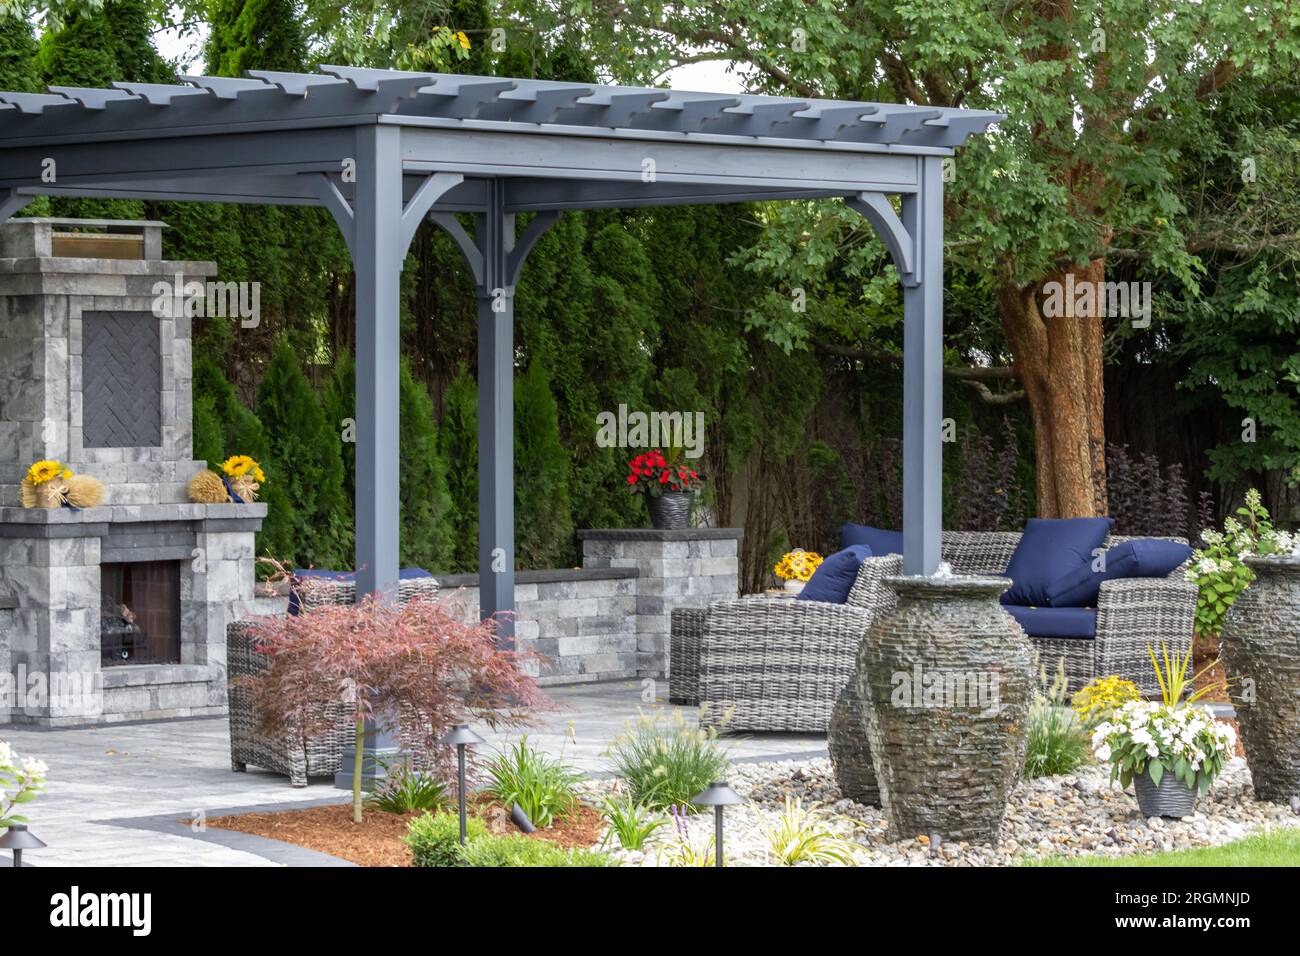 Landscape architecture featuring waterfalls and perennials for backyard oasis Stock Photo